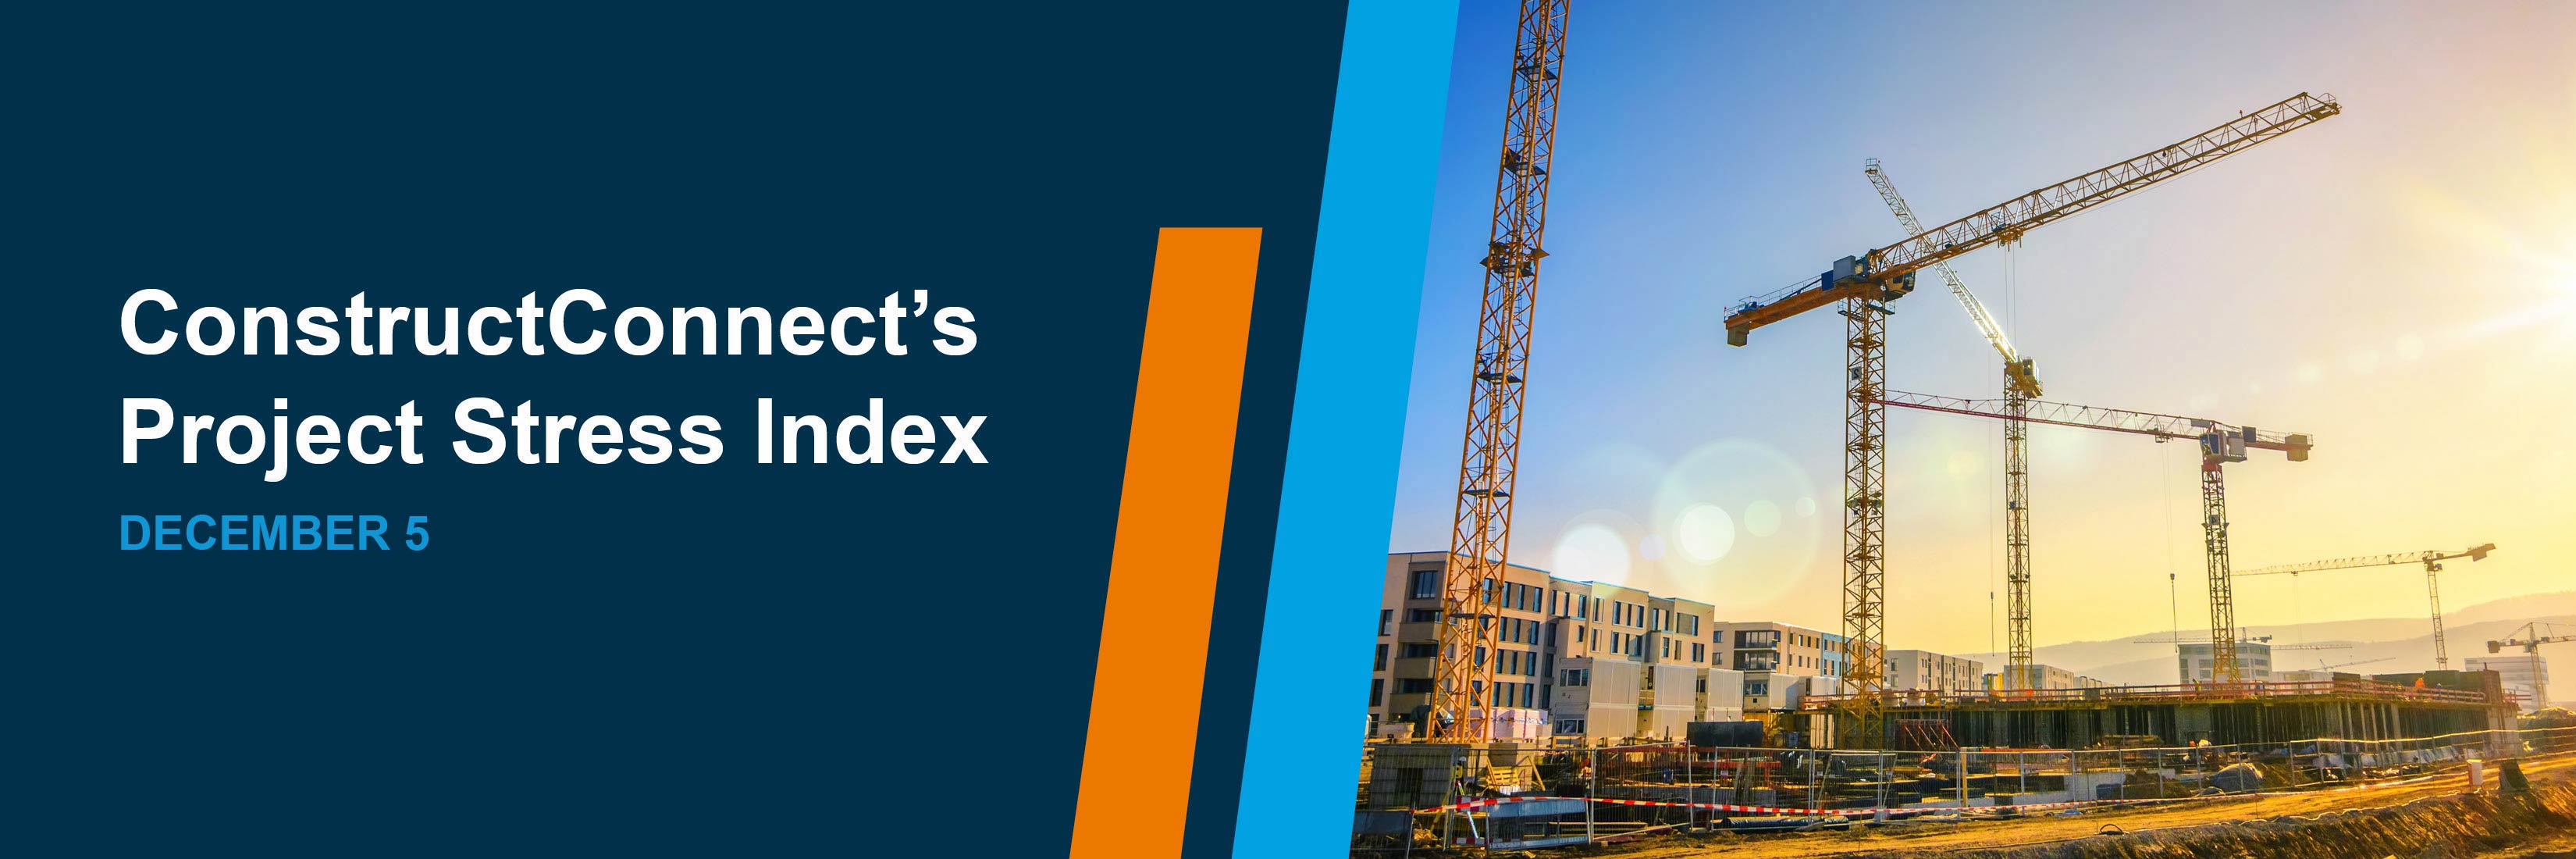 ConstructConnect's Project Stress Index - December 5